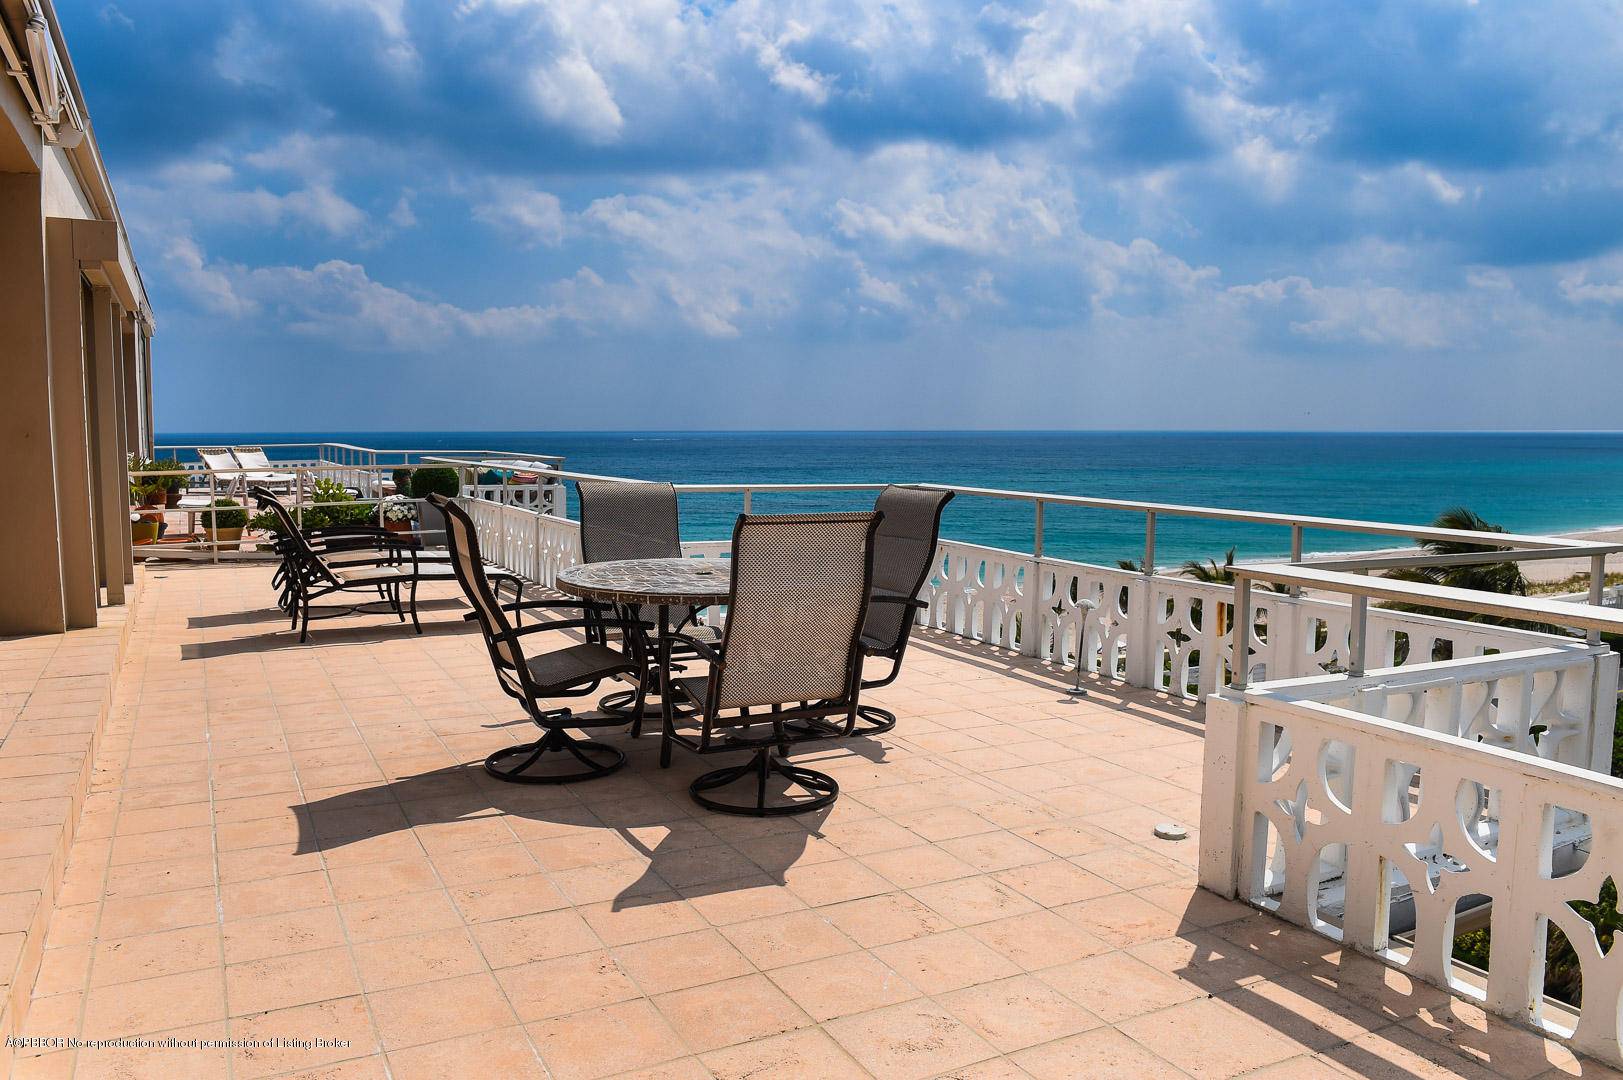 Bright 3BR 2BA penthouse with breathtaking ocean views, expansive balcony and 10' ceilings.